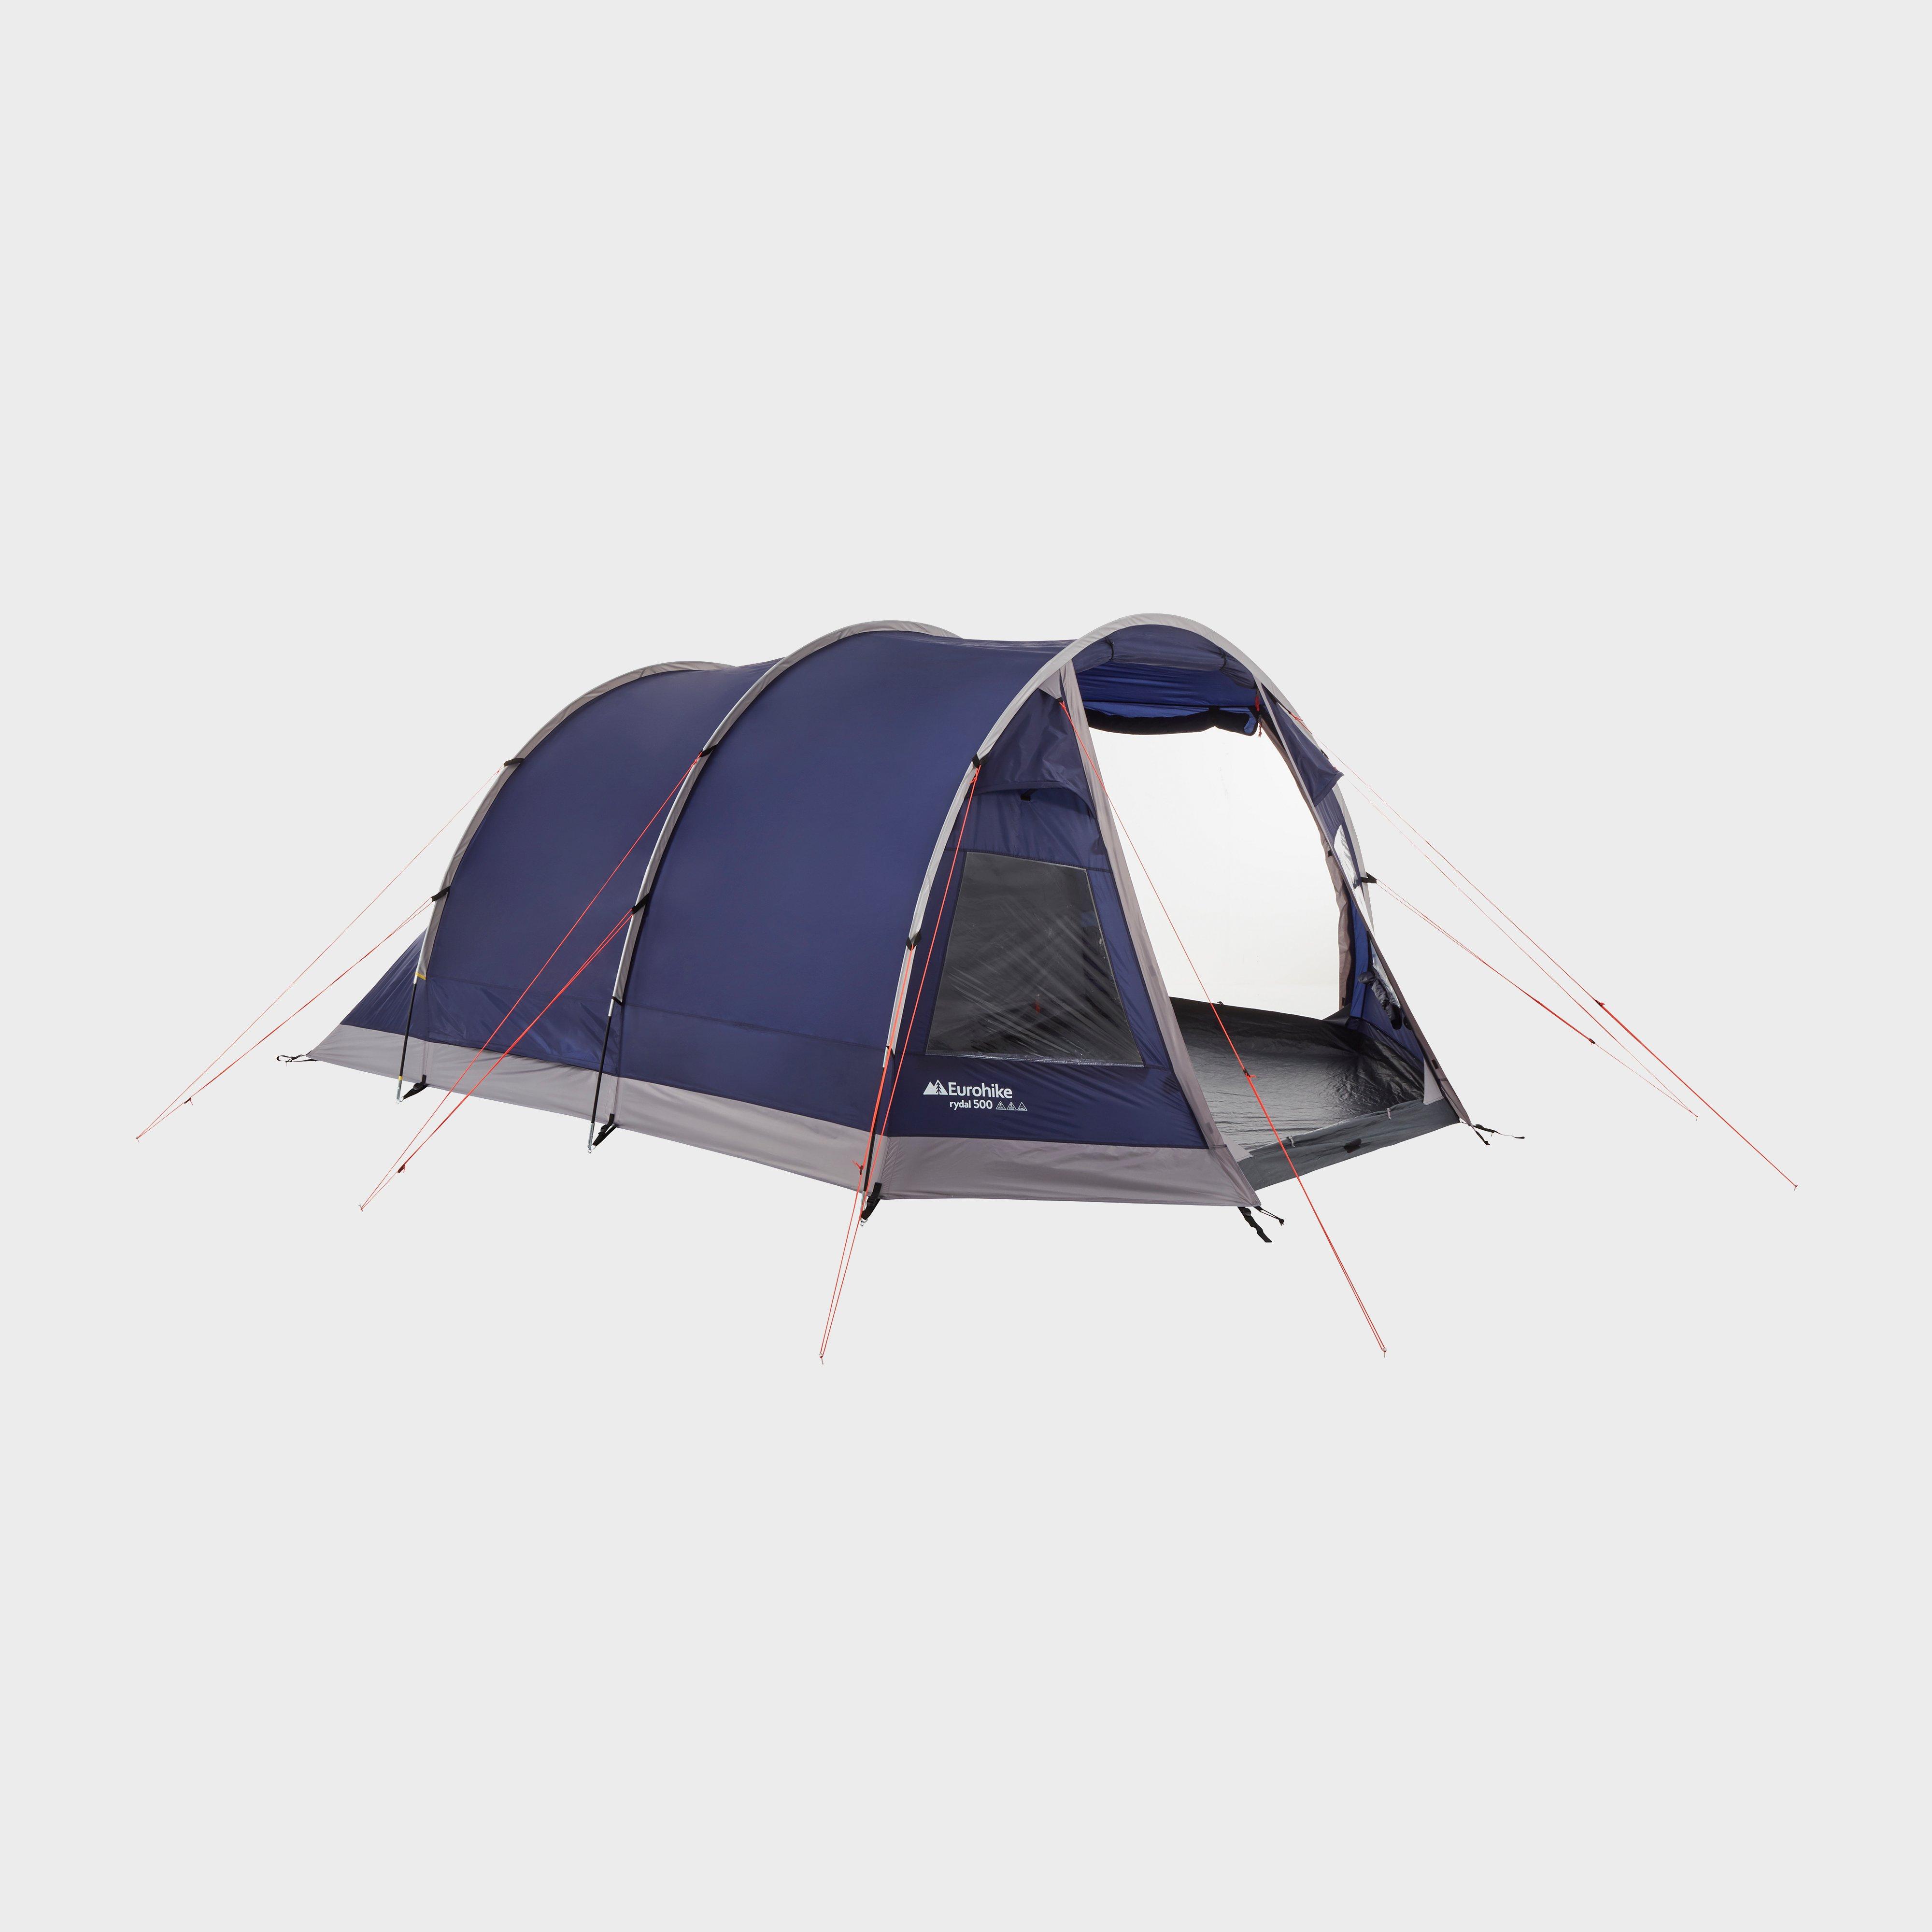 Eurohike Eurohike Rydal 500 5 Person Tent - Navy, Navy